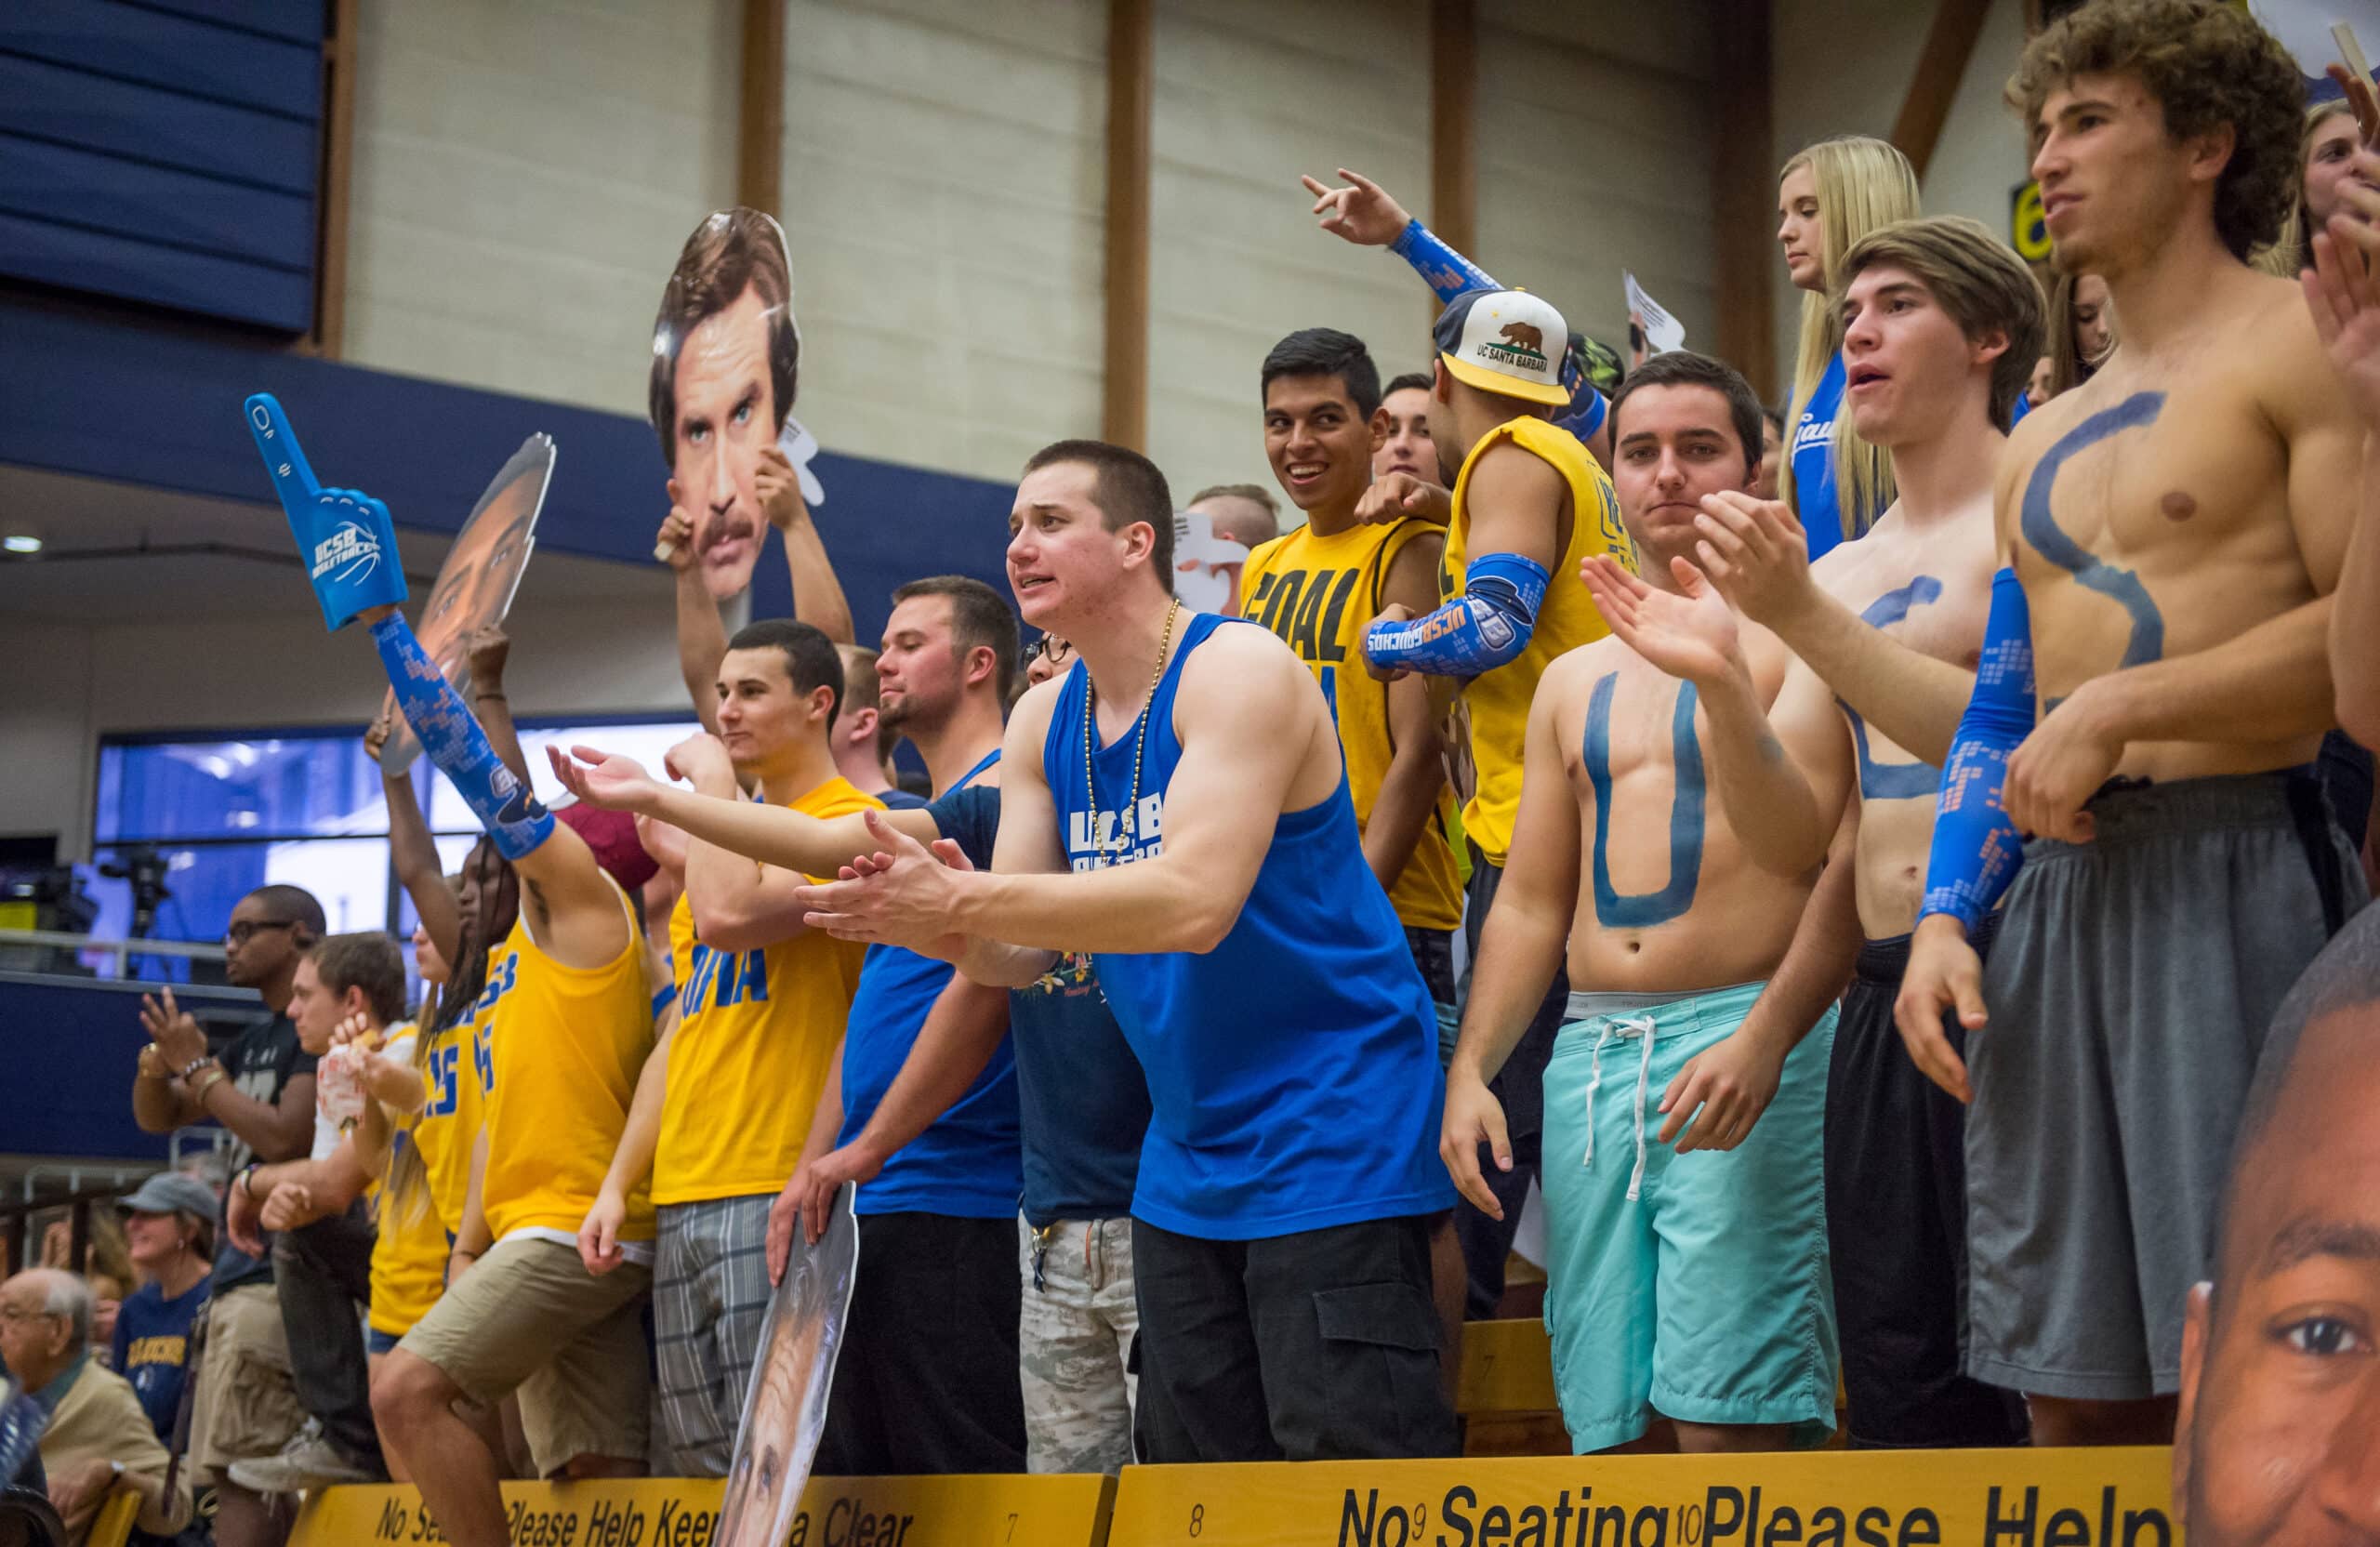 UCSB Surge student section rallying behind the basketball team, decked out in yellow and blue.